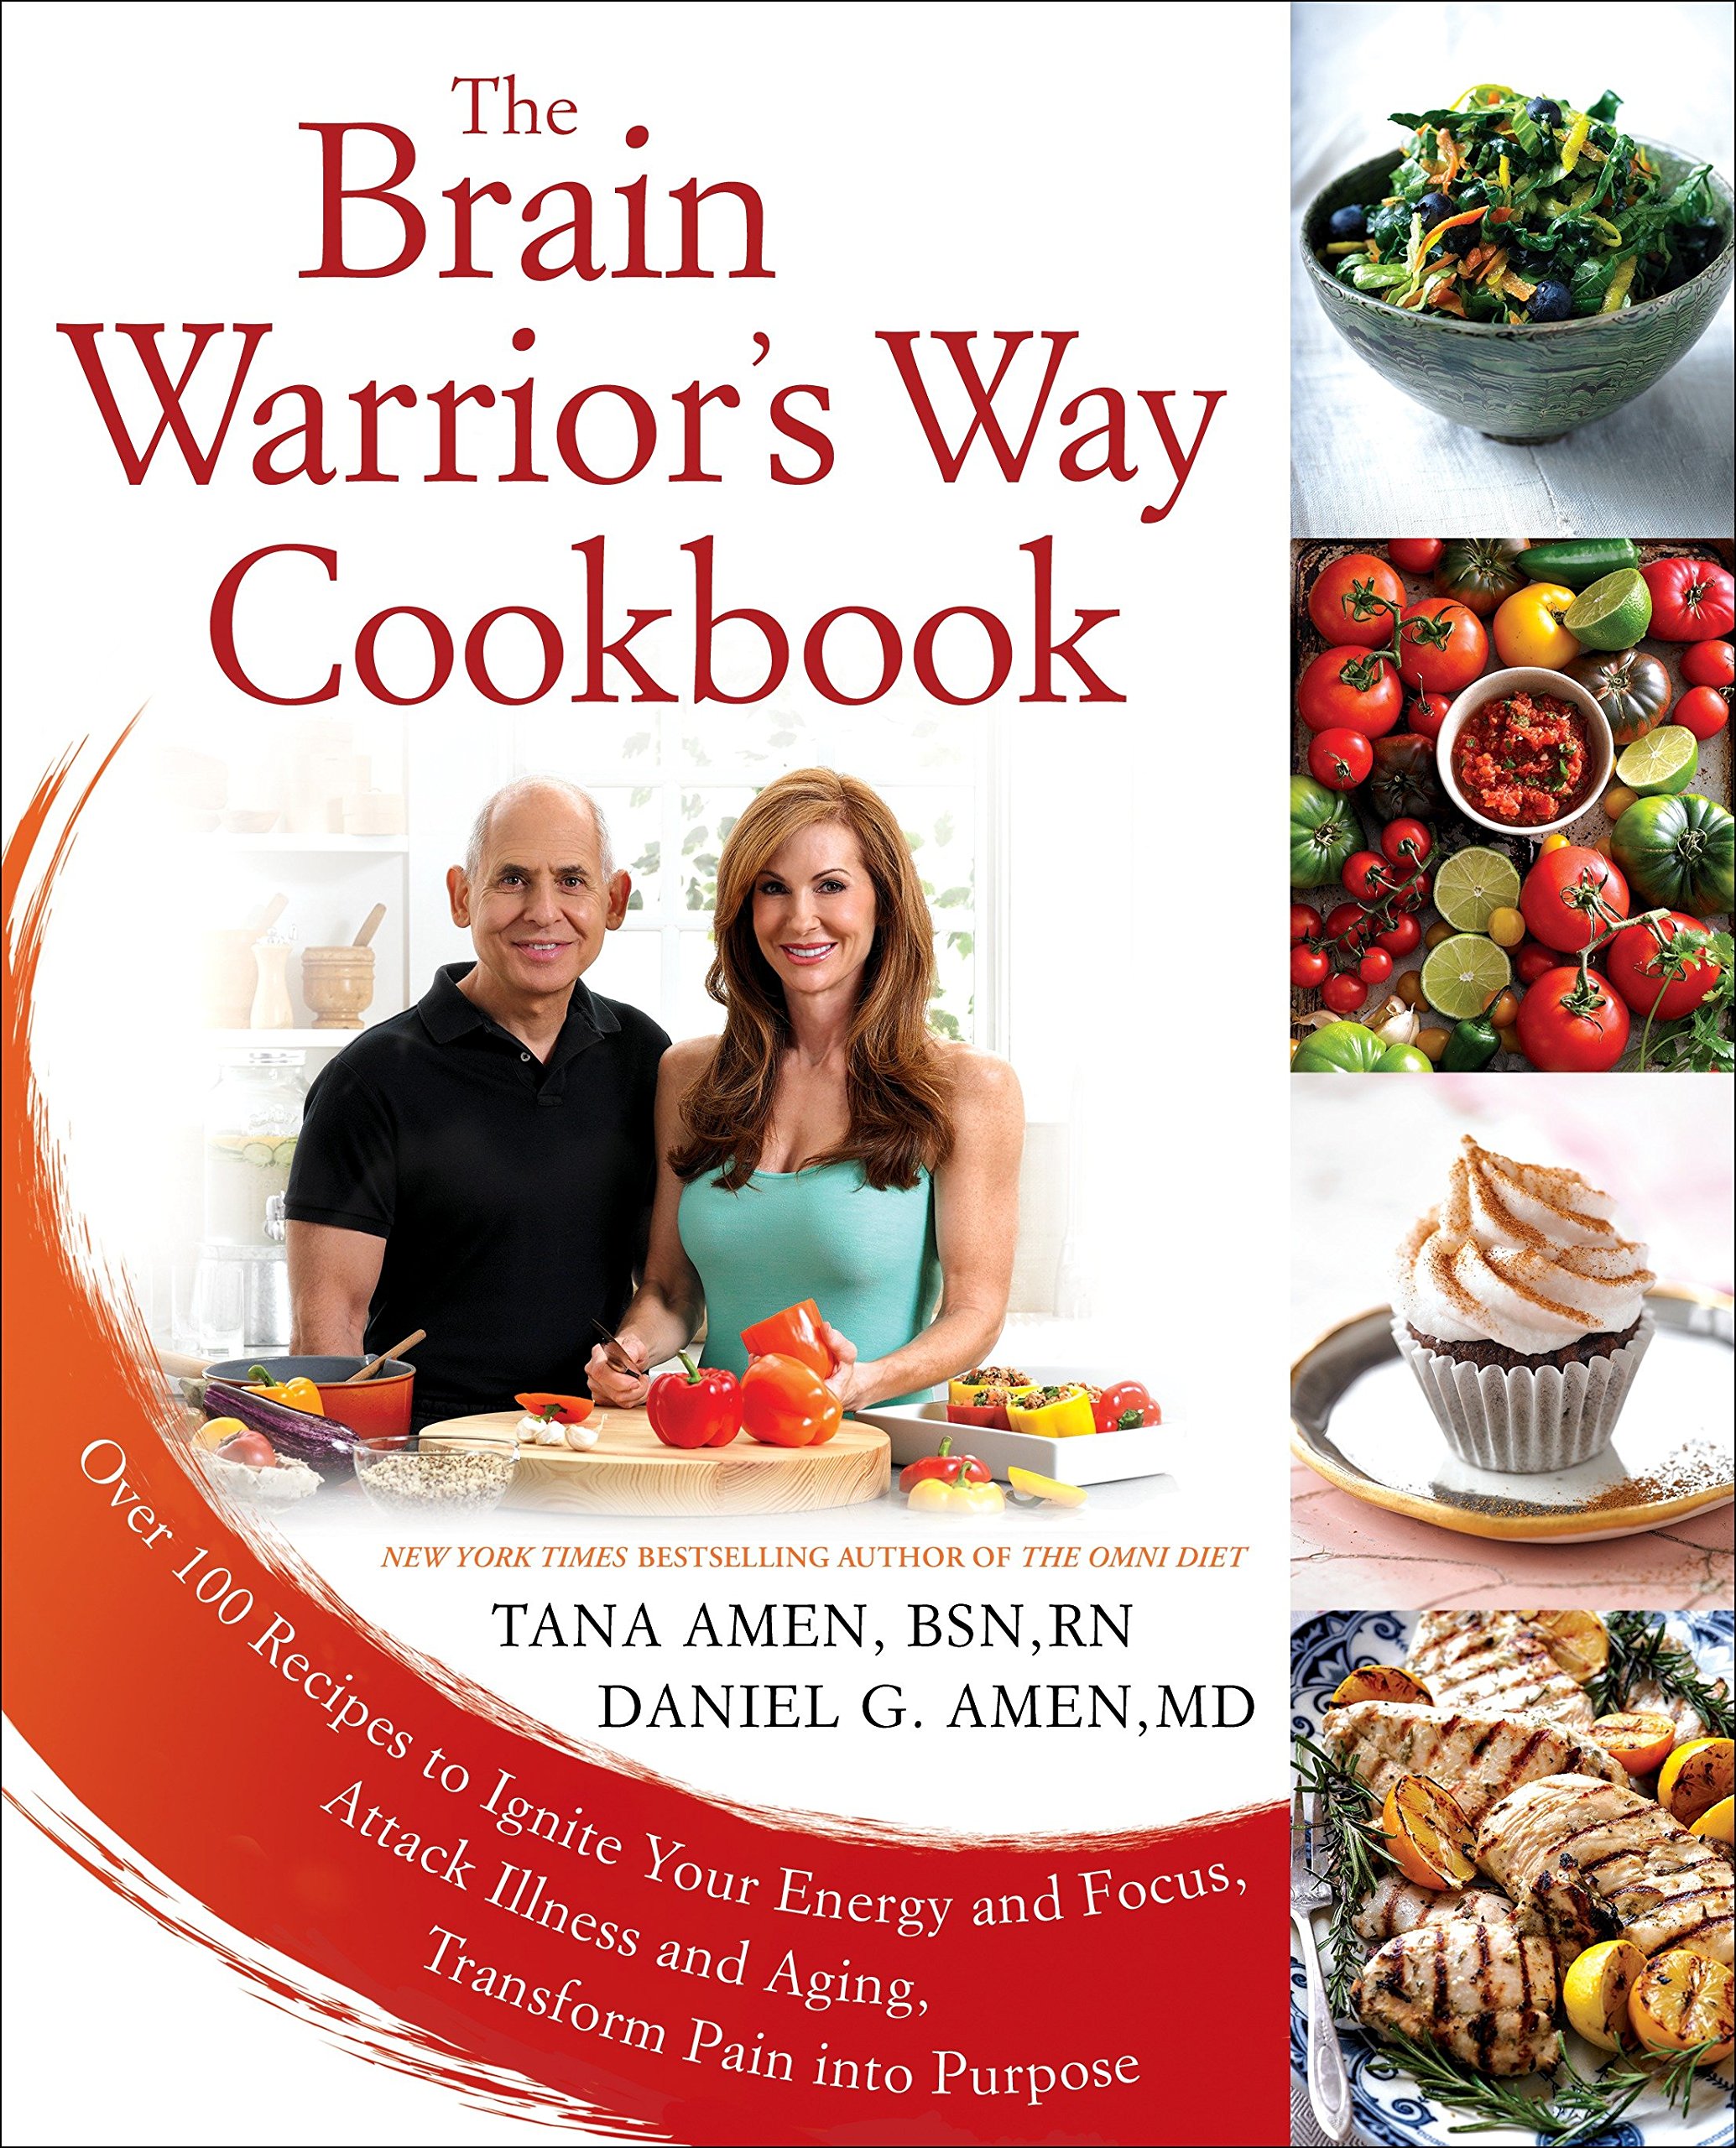 The Brain Warrior's Way Cookbook: Over 100 Recipes to Ignite Your Energy and Focus<!-- @ 15 @ --> Attack Illness and Aging<!-- @ 15 @ --> Transform Pain into Purpose